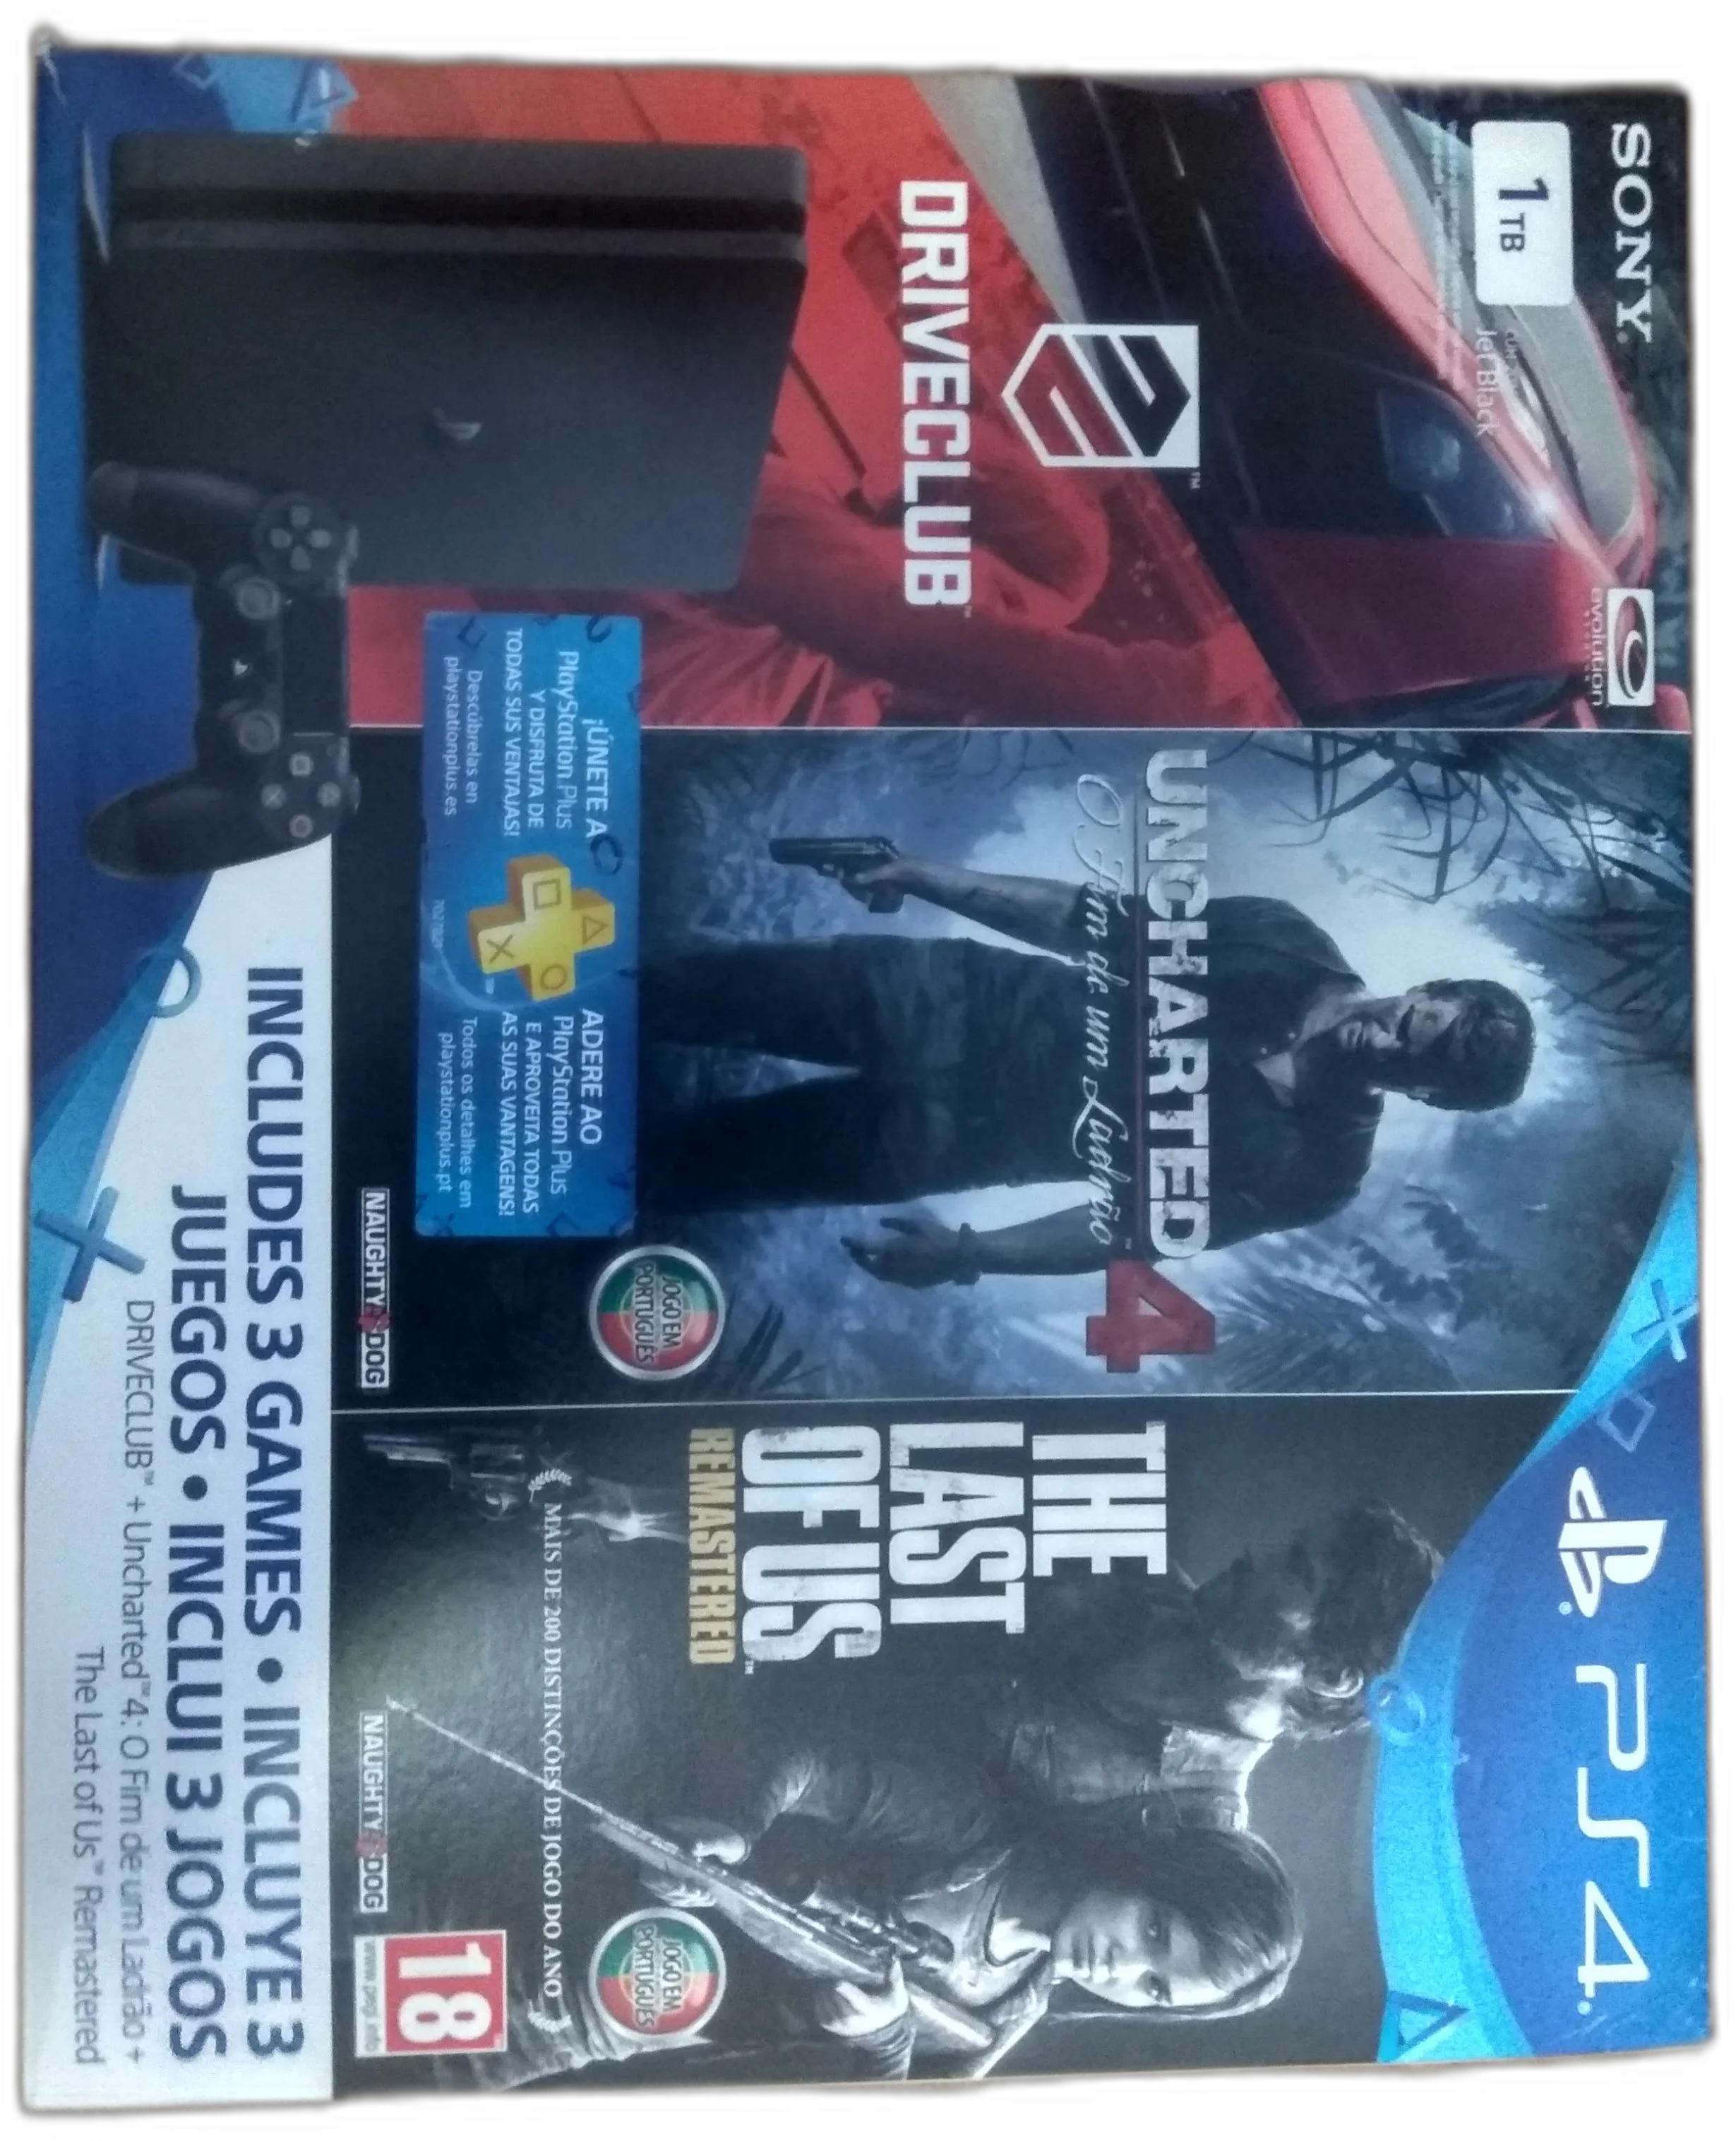  Sony PlayStation 4 Slim Driveclub + Uncharted 4 + The Last of Us Bundle